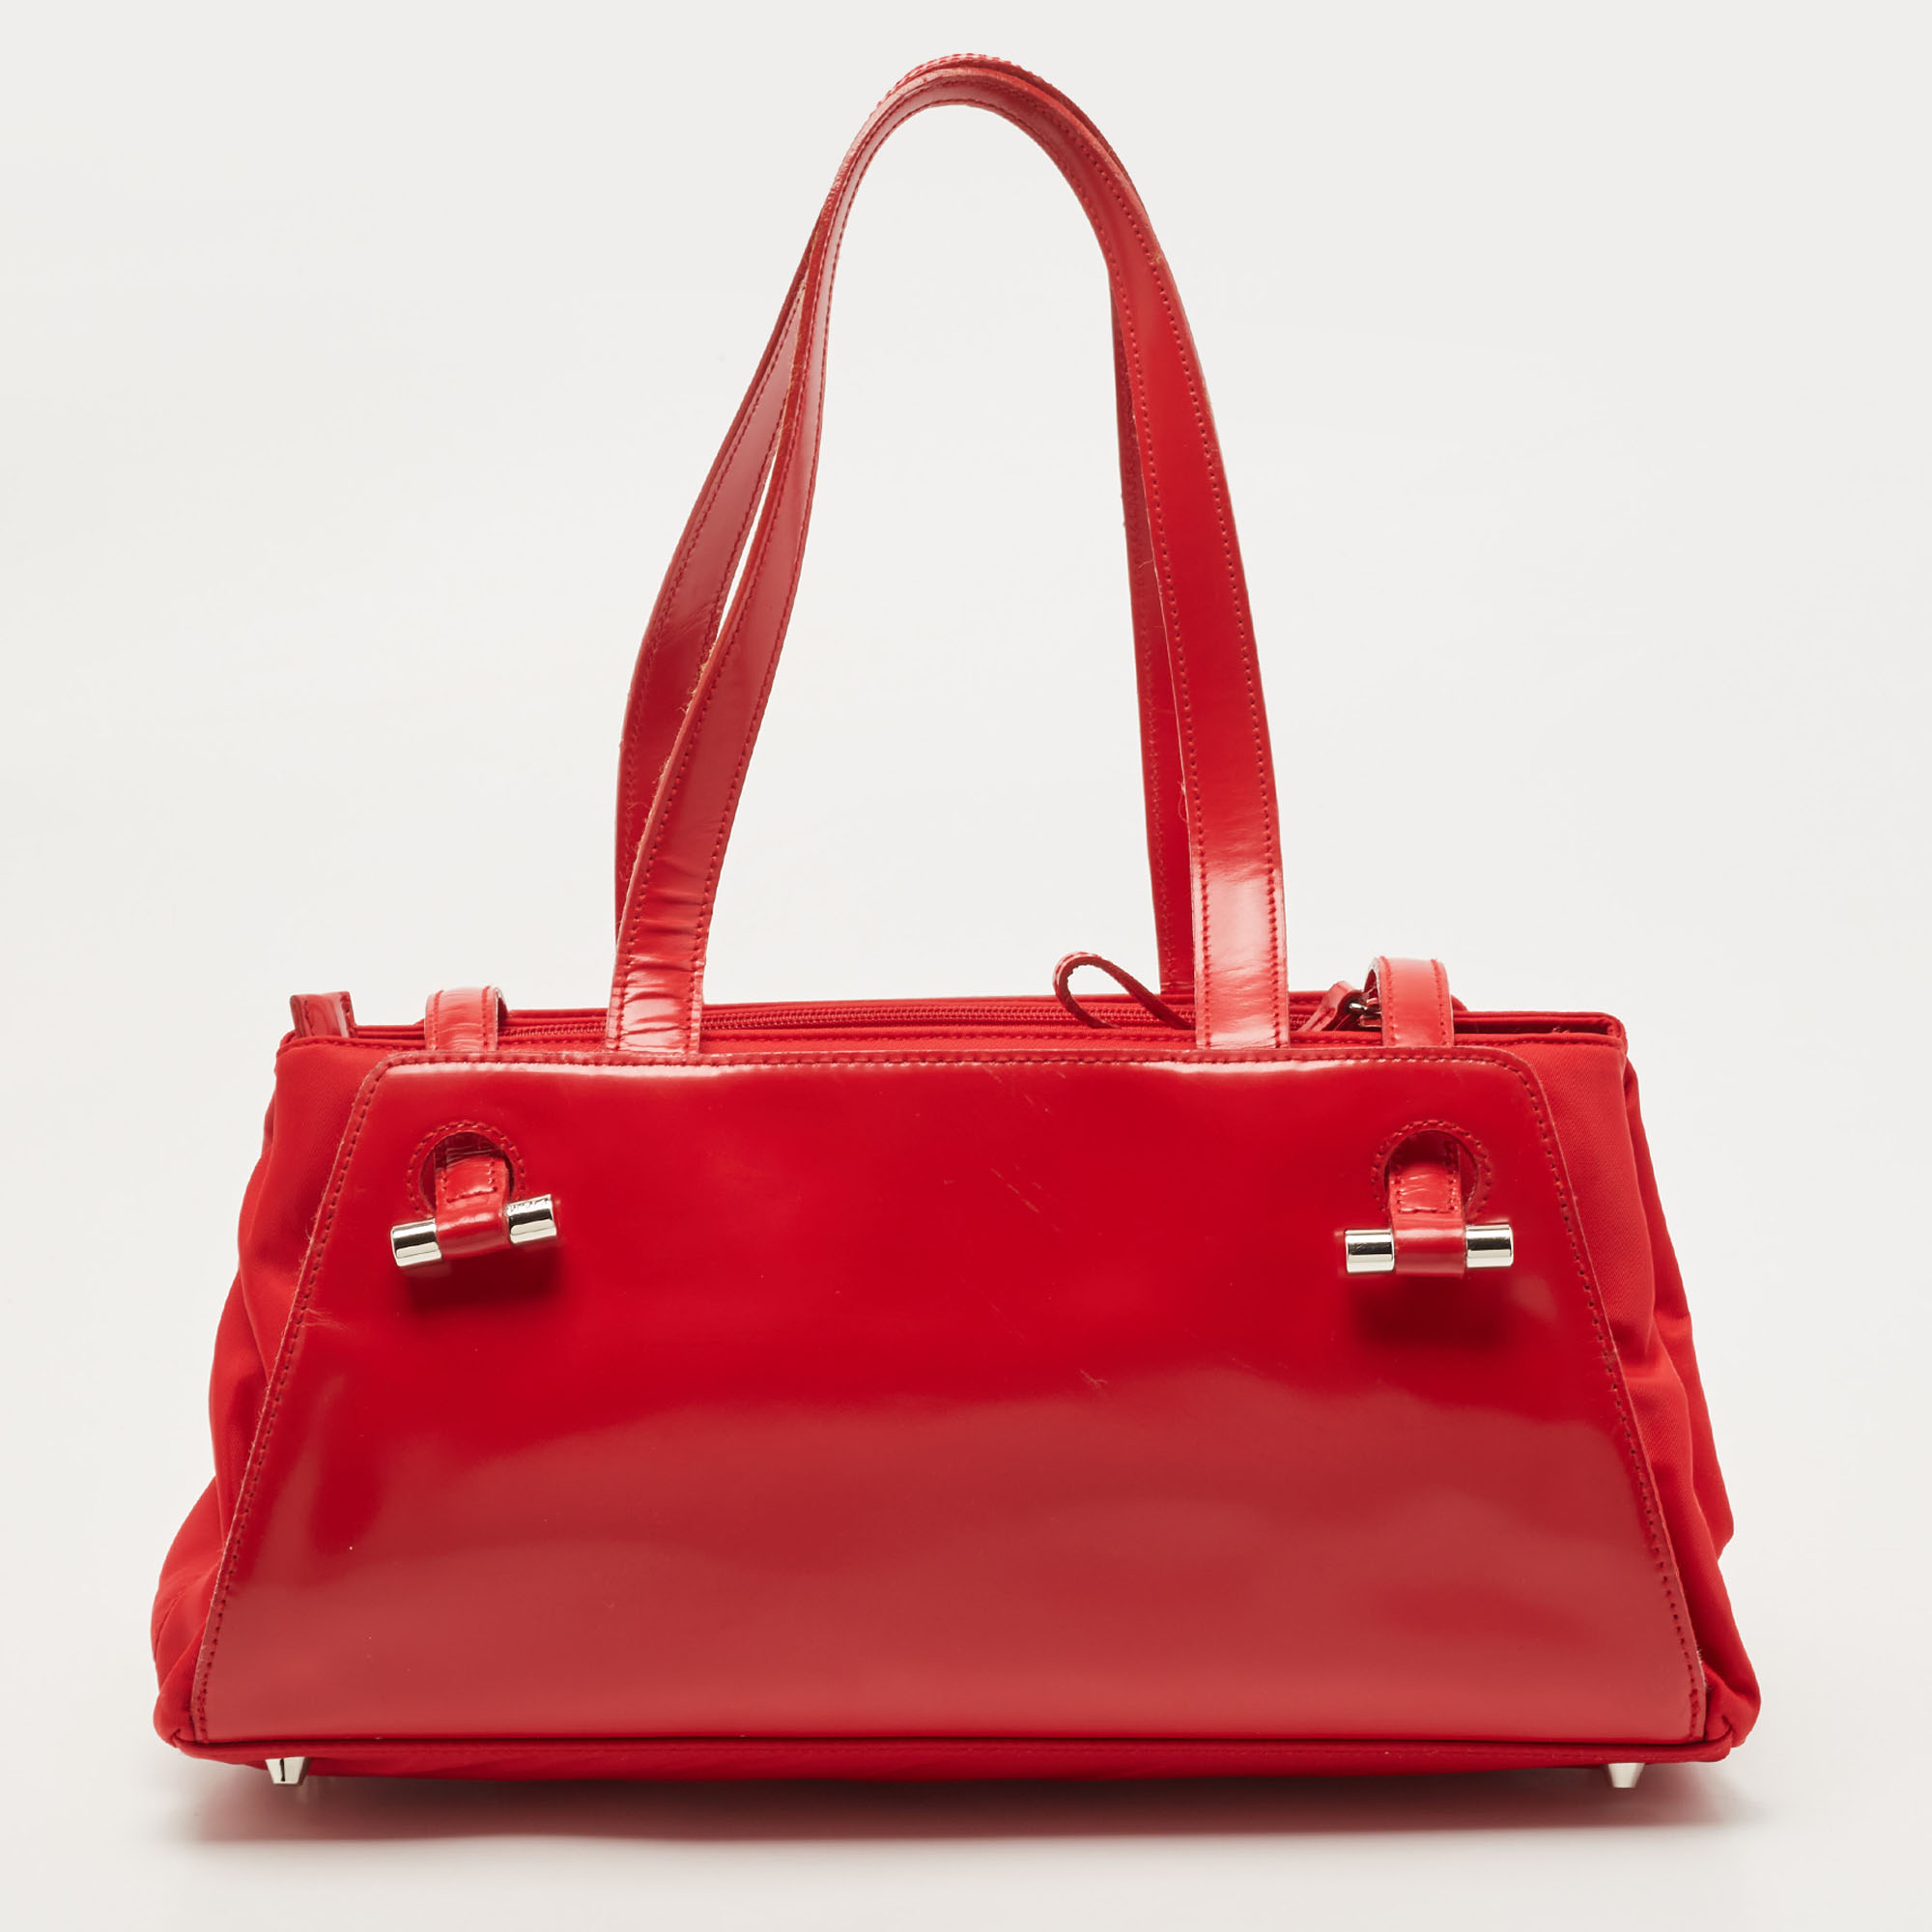 Furla Red Gloss Leather And Fabric Shoulder Bag